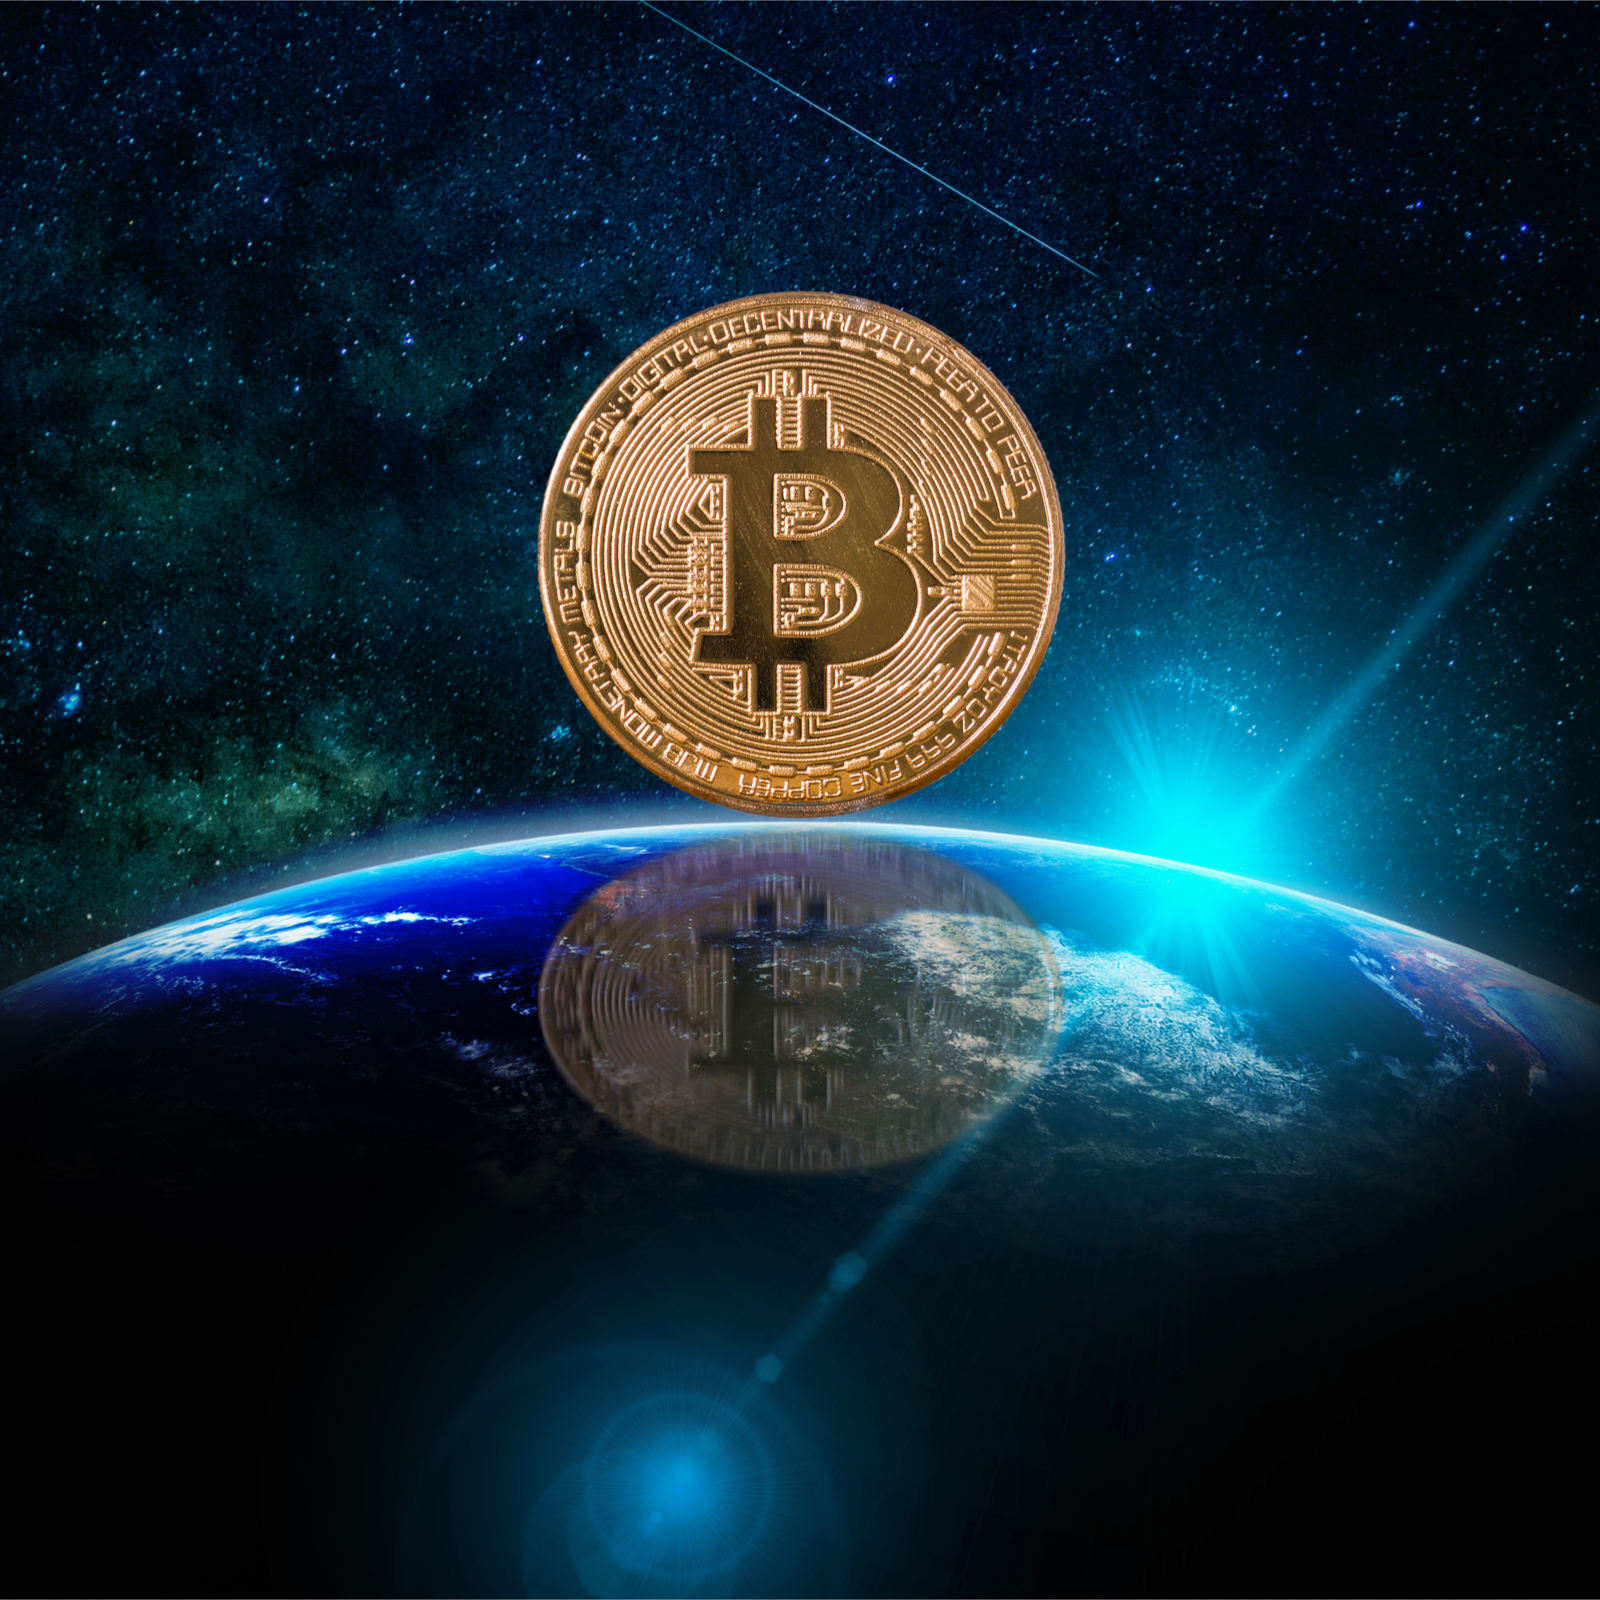 This Week in Bitcoin: Digital Money Makes the World Go Round